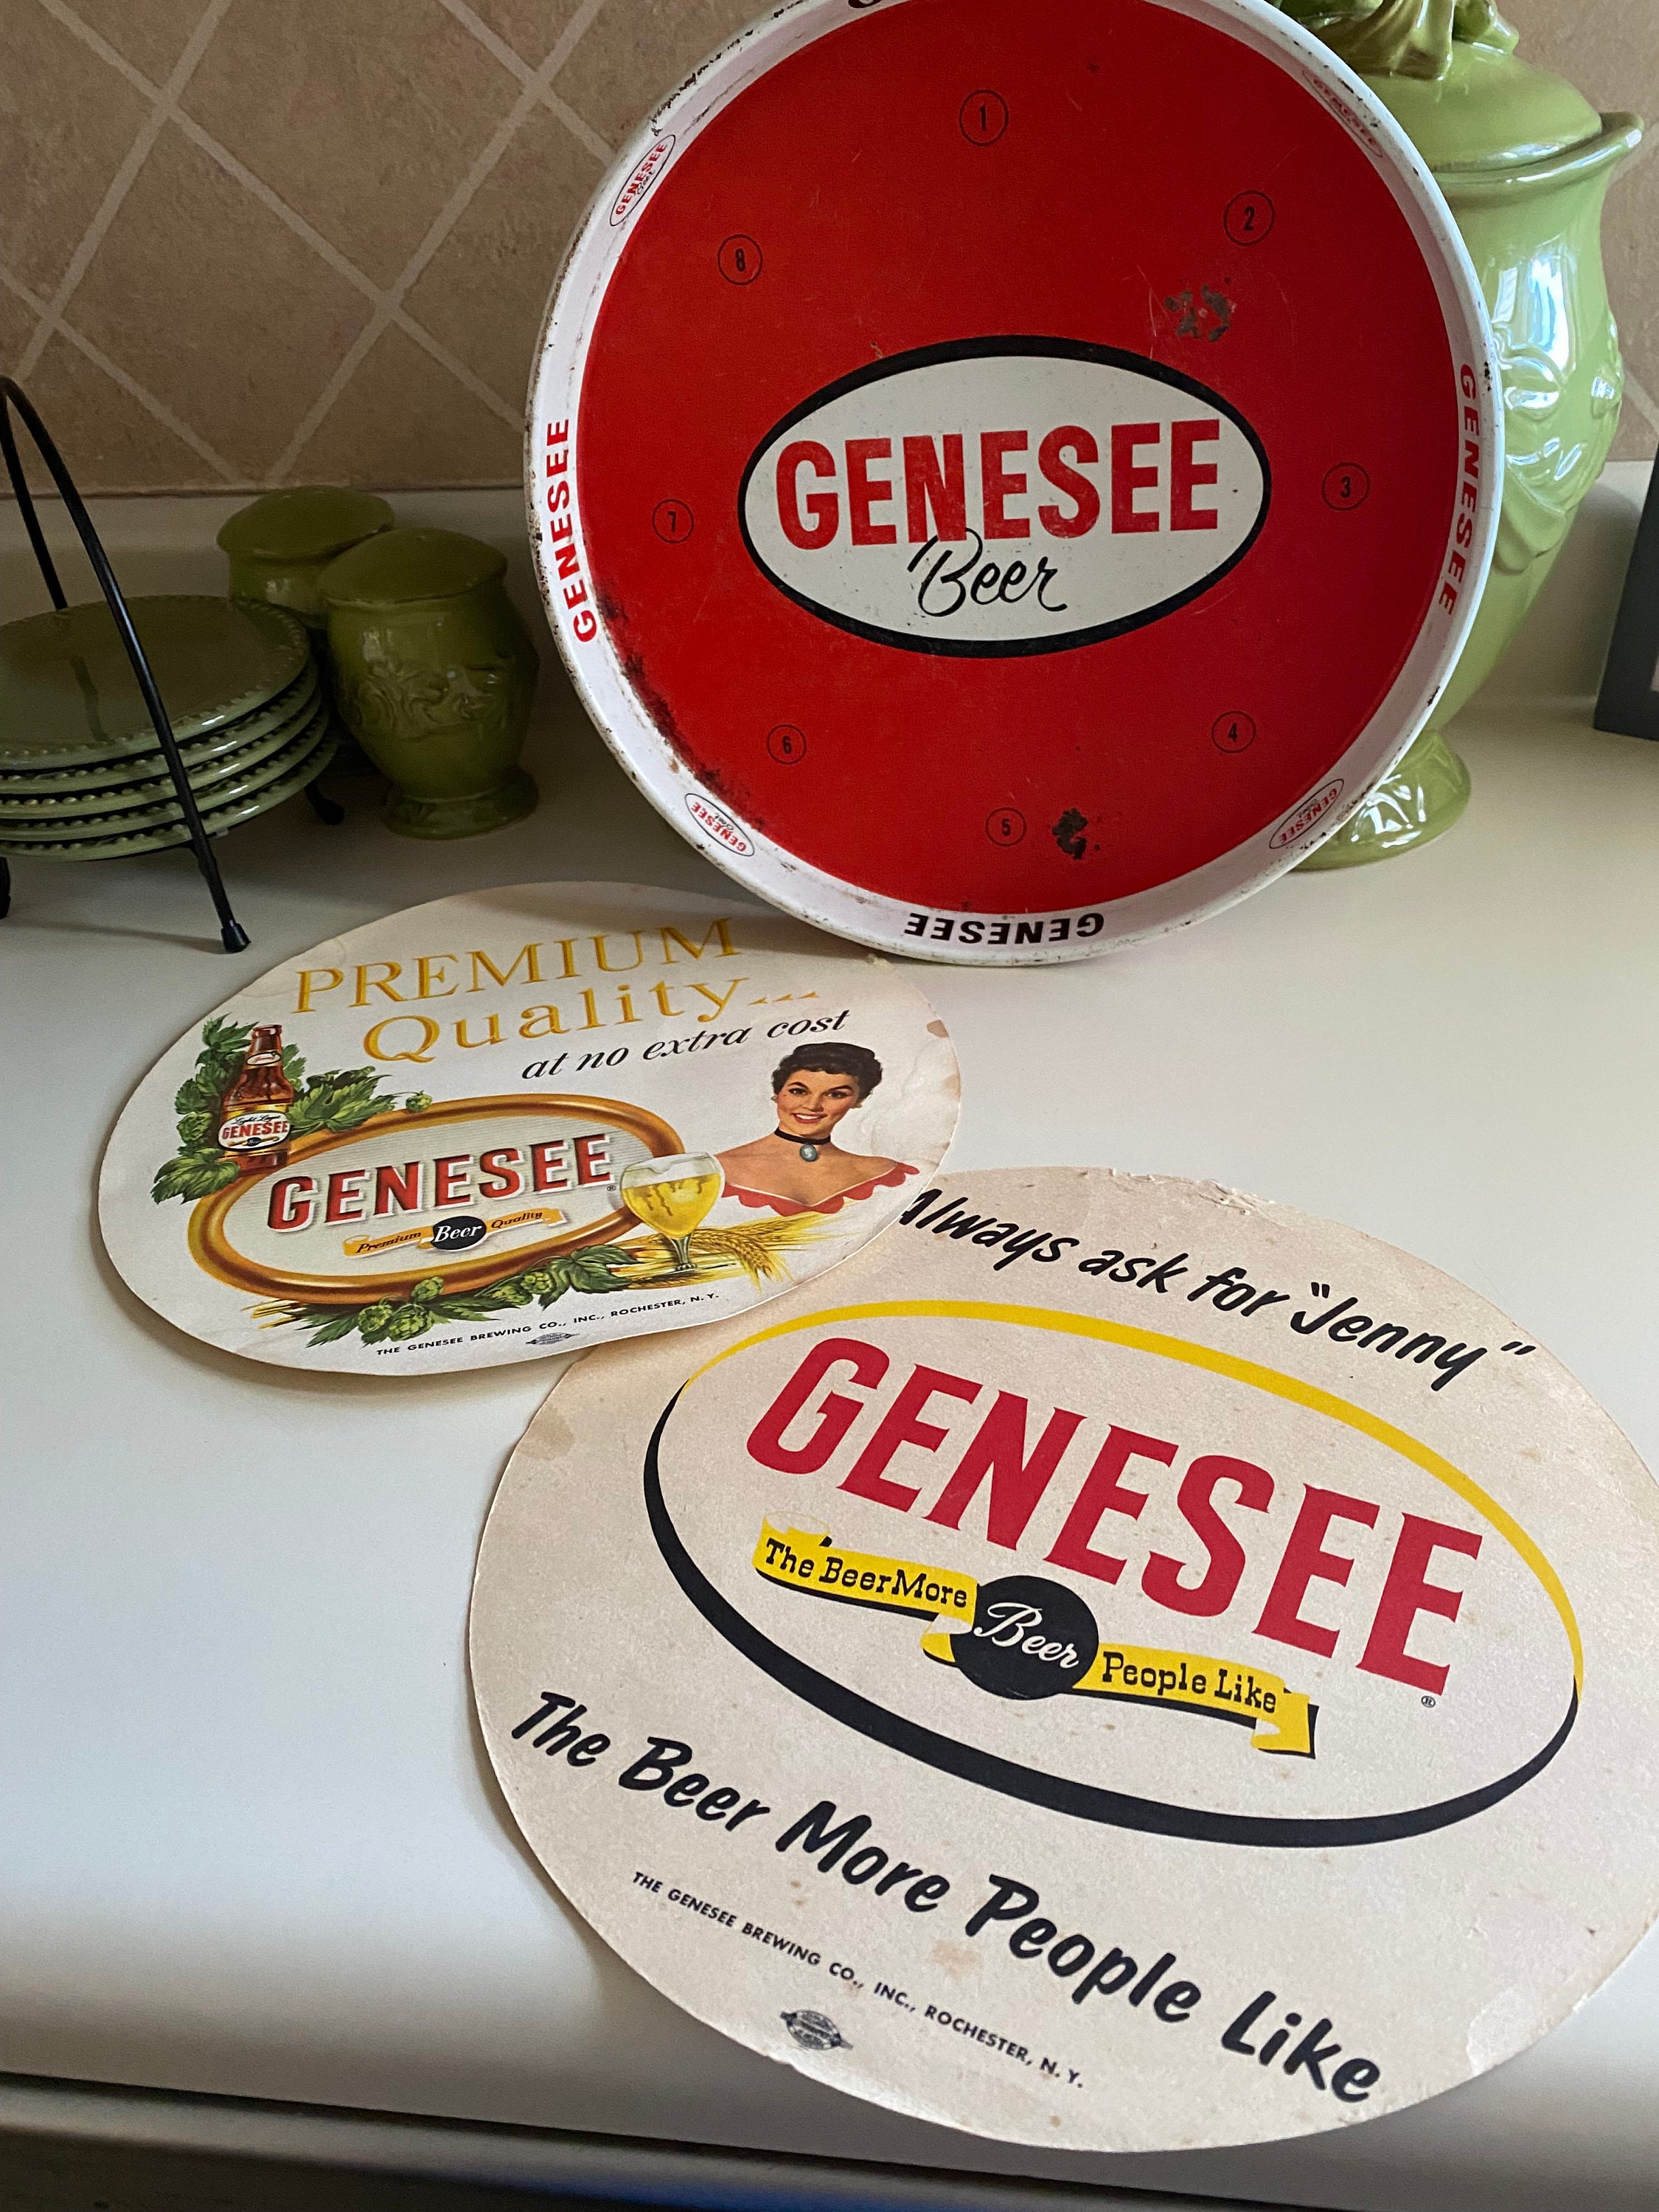 GENESEE Beer oval New York LOGO PATCH iron on craft beer brewery brewing 